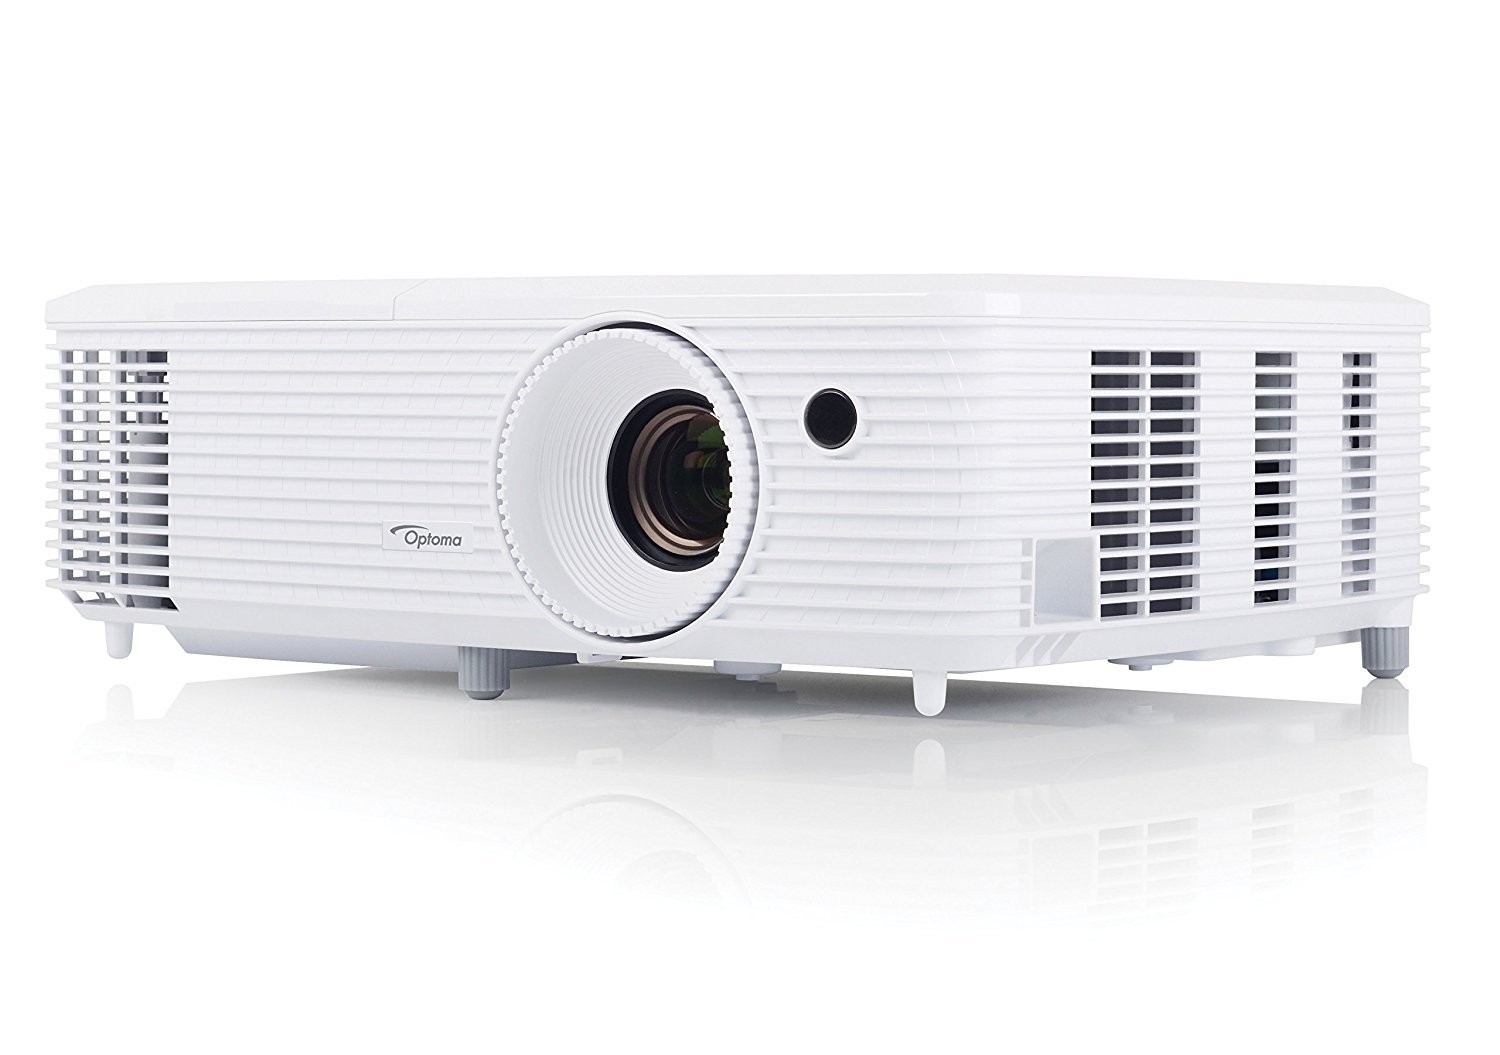 In Which Country Is The Optoma HD27 1080P 3D DLP Home Theater Projector Manufactured